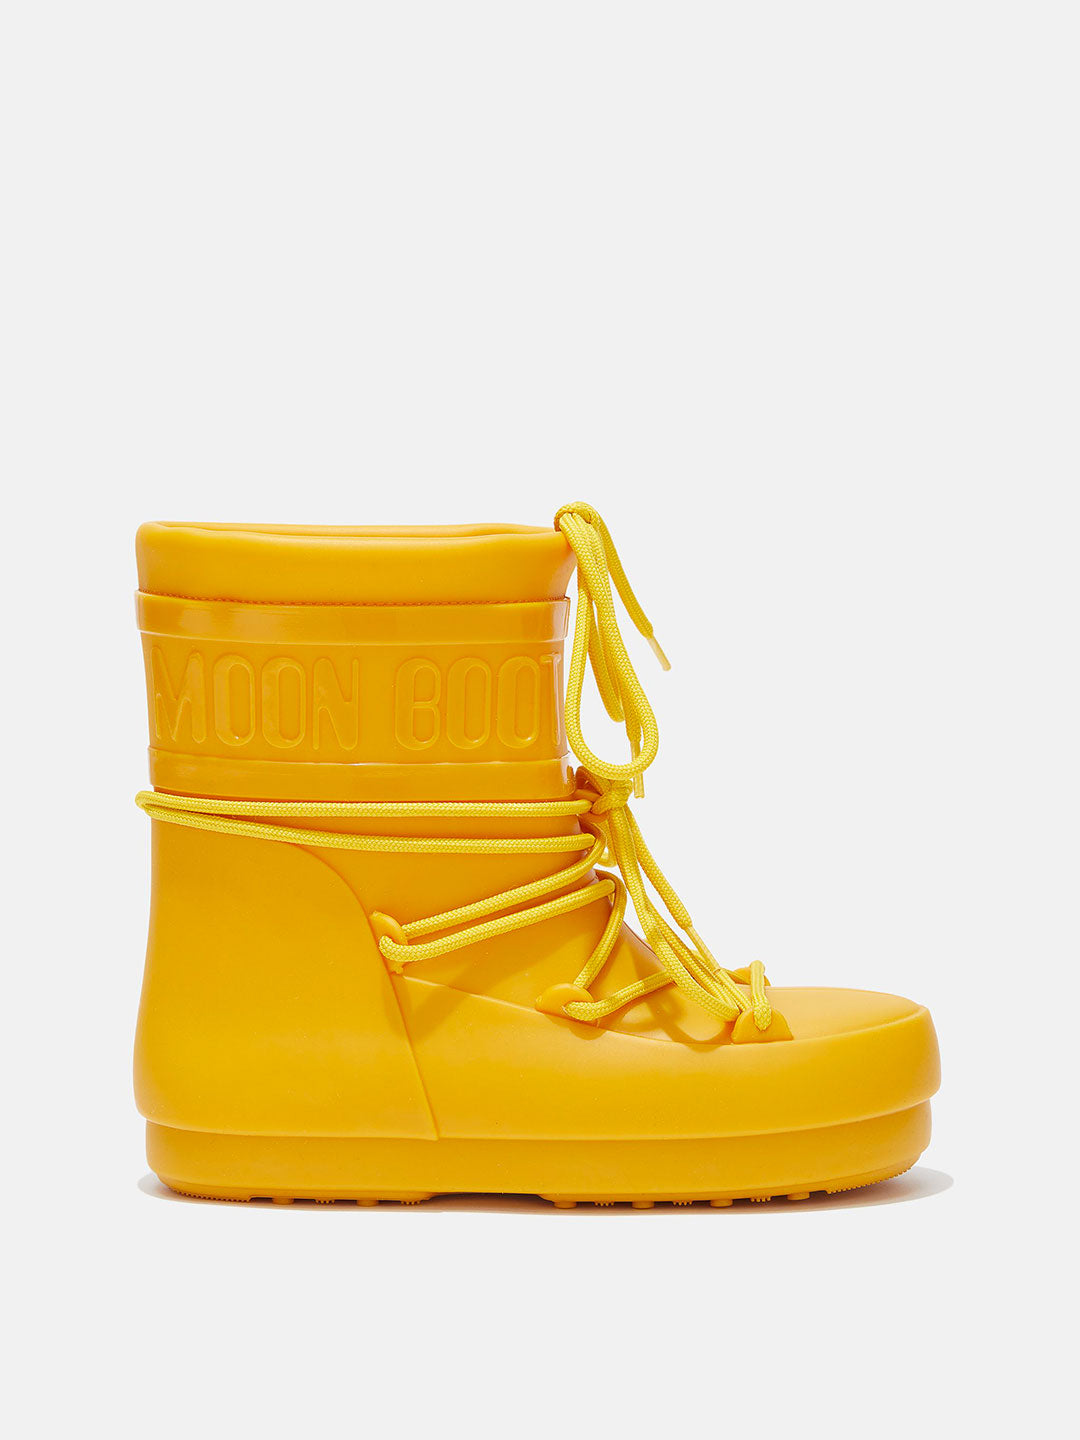 Moon boot yellow rubber galoshes